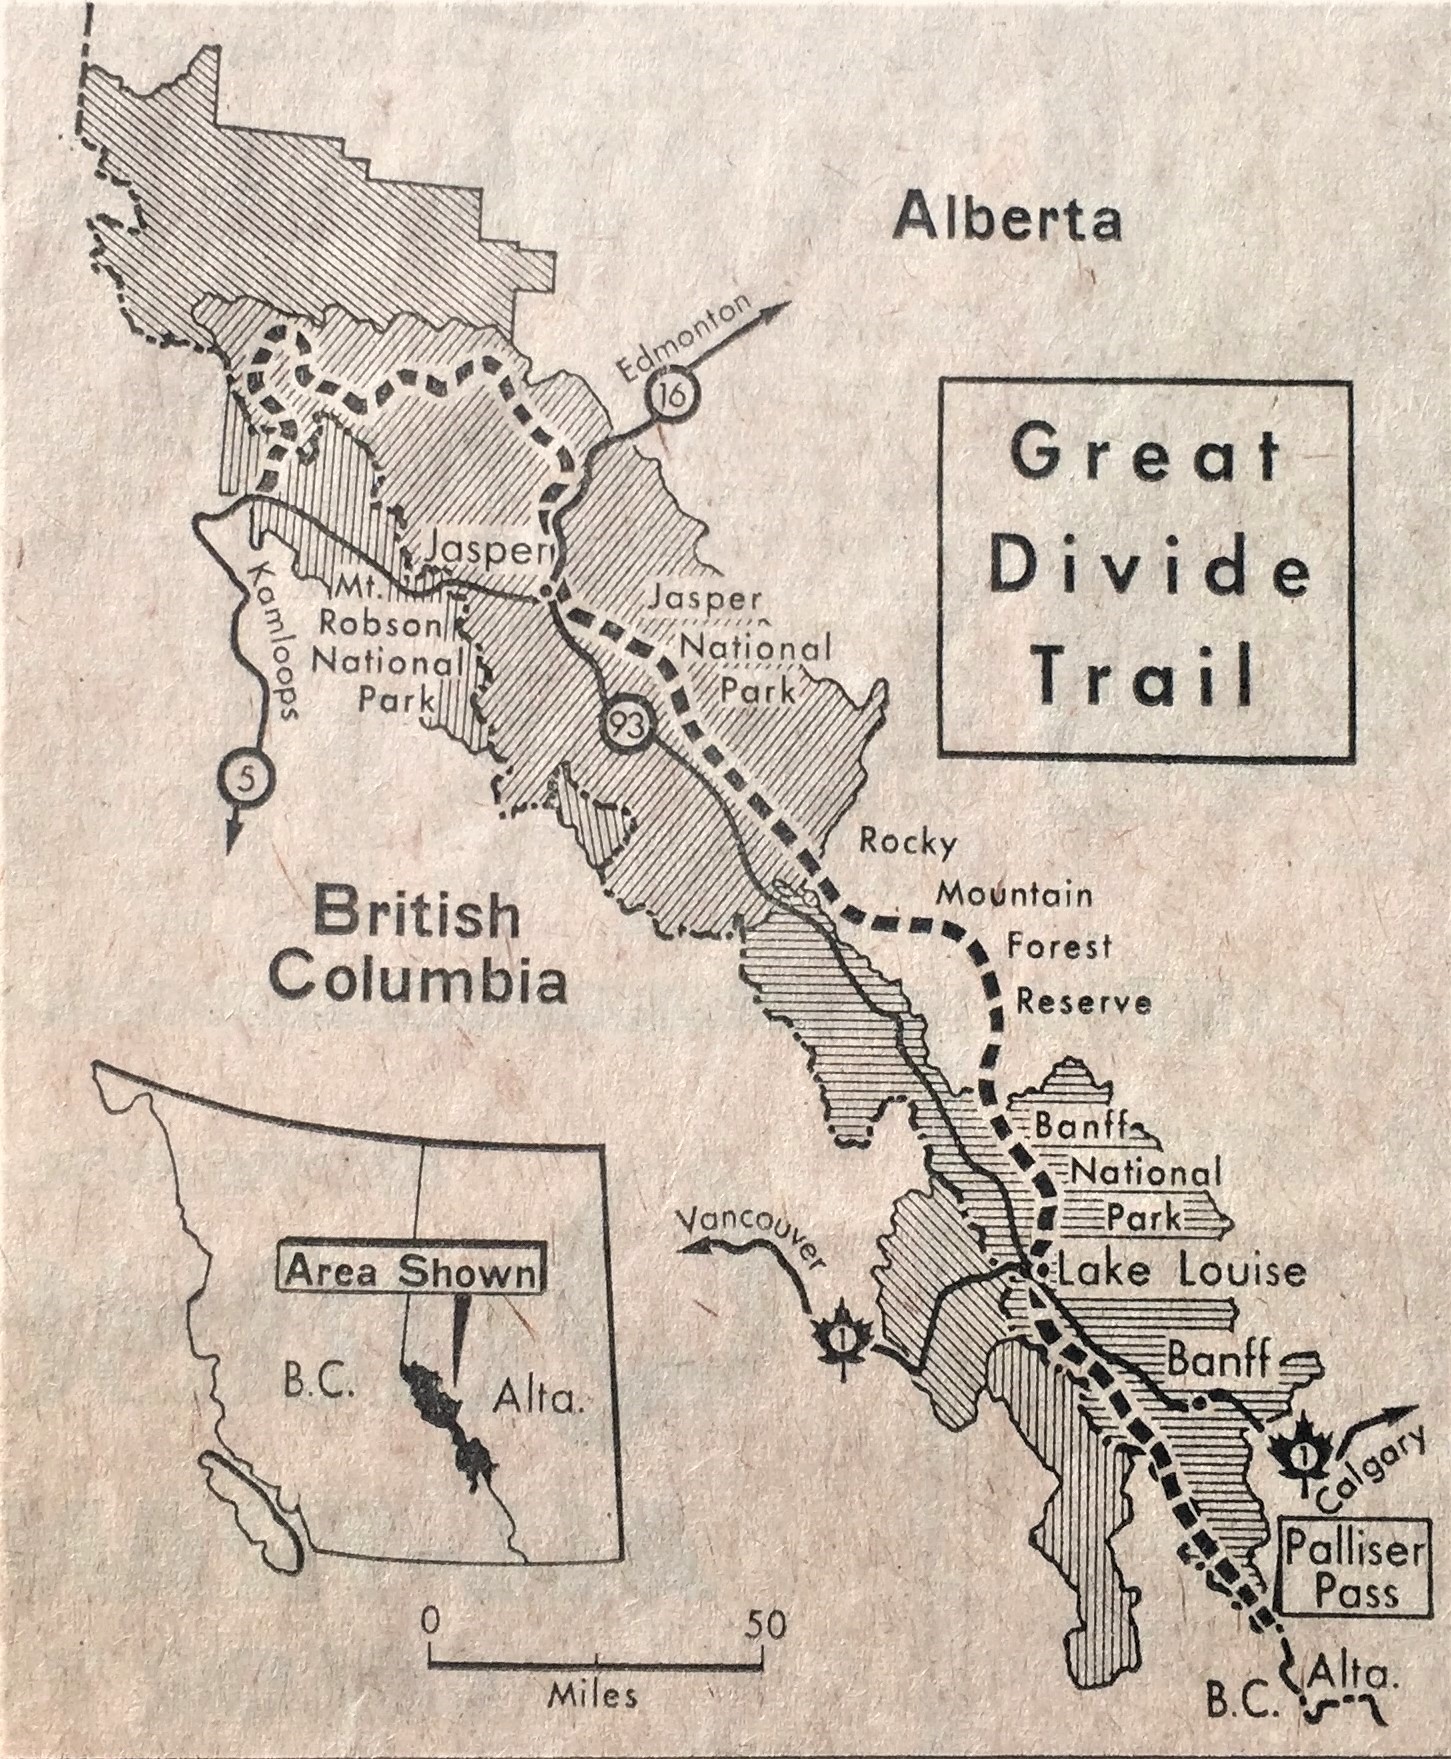 Thor’s Pioneering Proposal – The Great Divide Trail Association